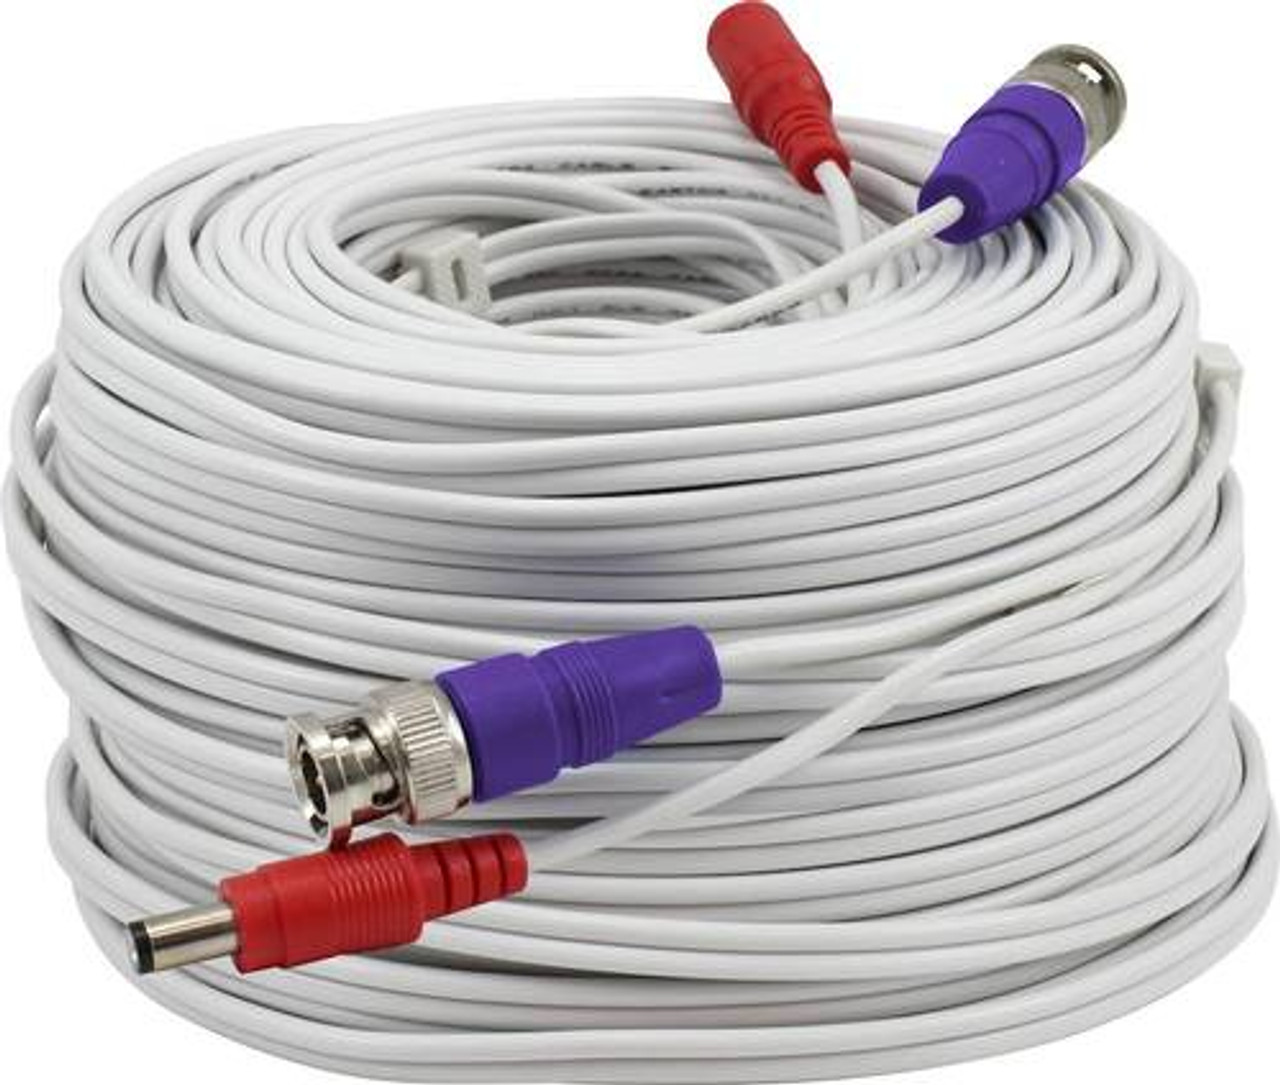 Swann - 200' BNC Extension Cable - White